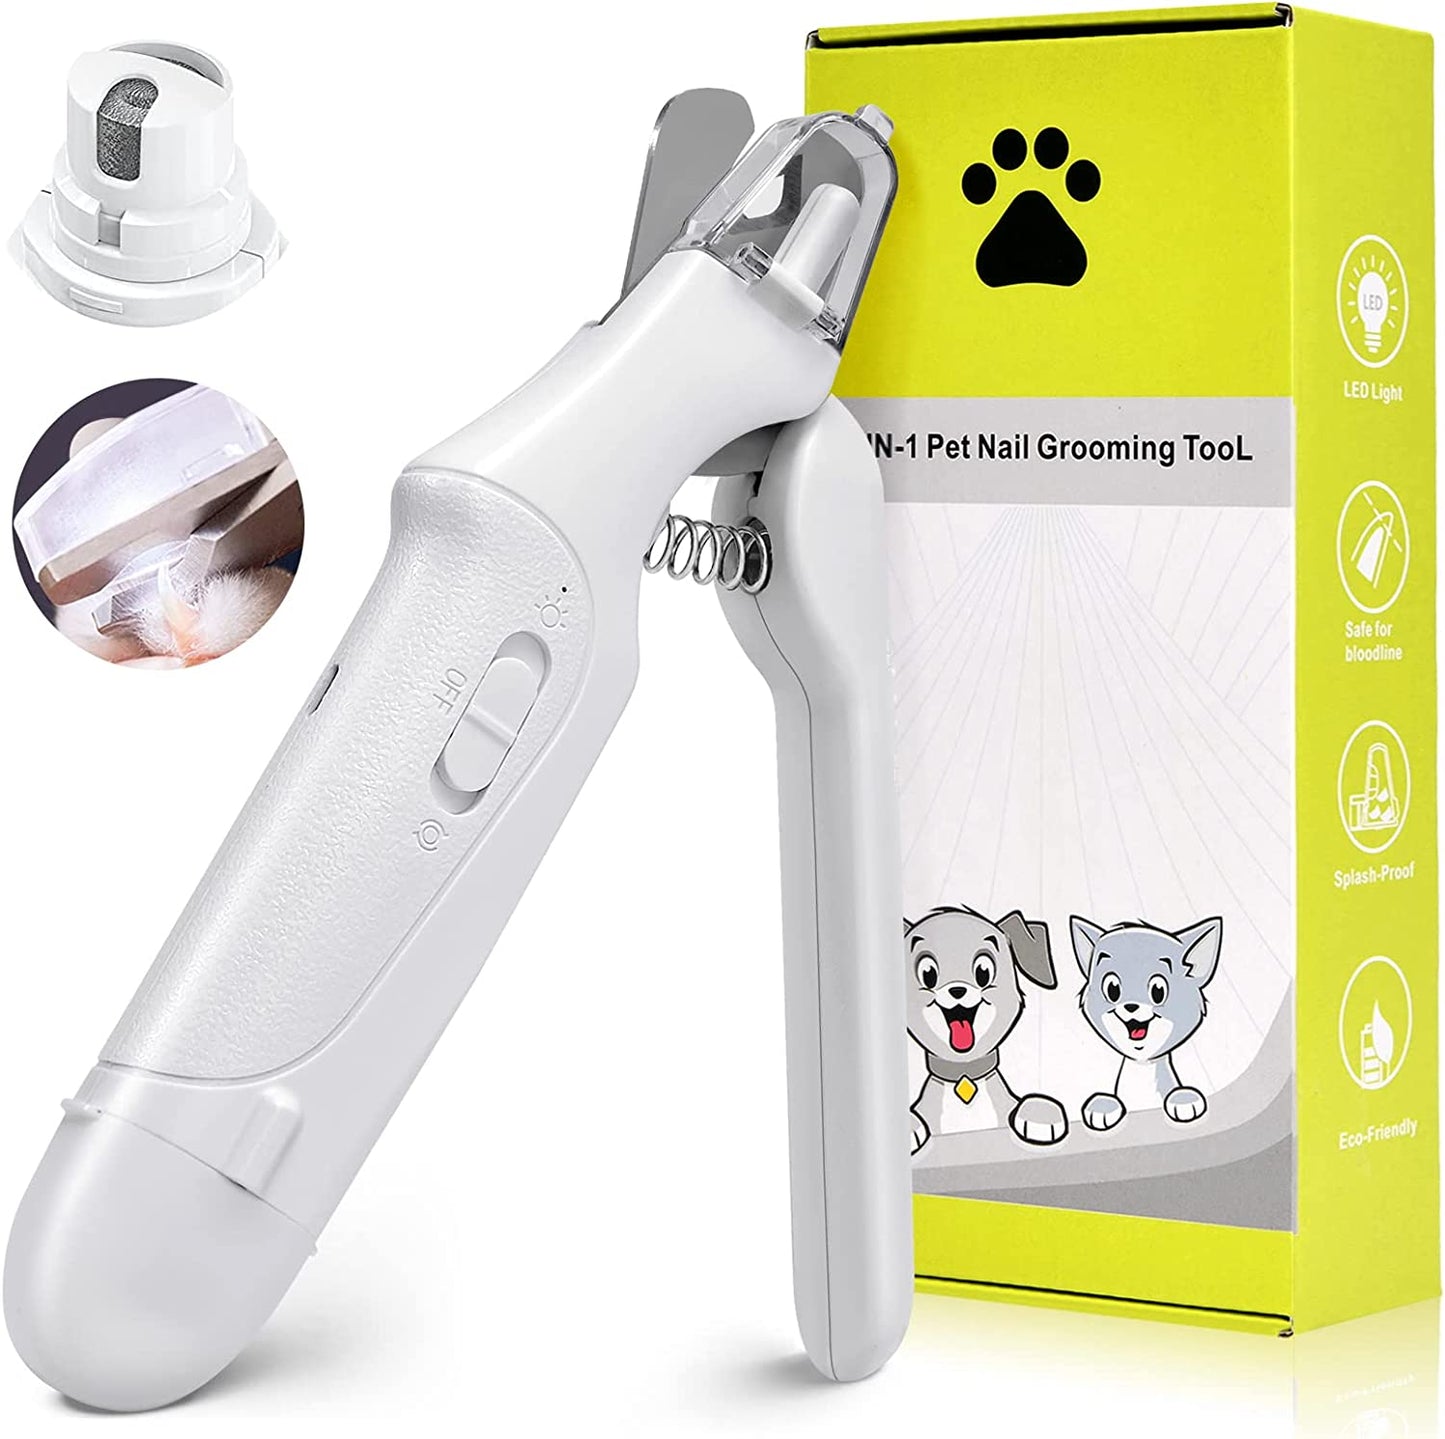 Upgraded 2-in-1 Electric Dog Nail Clippers